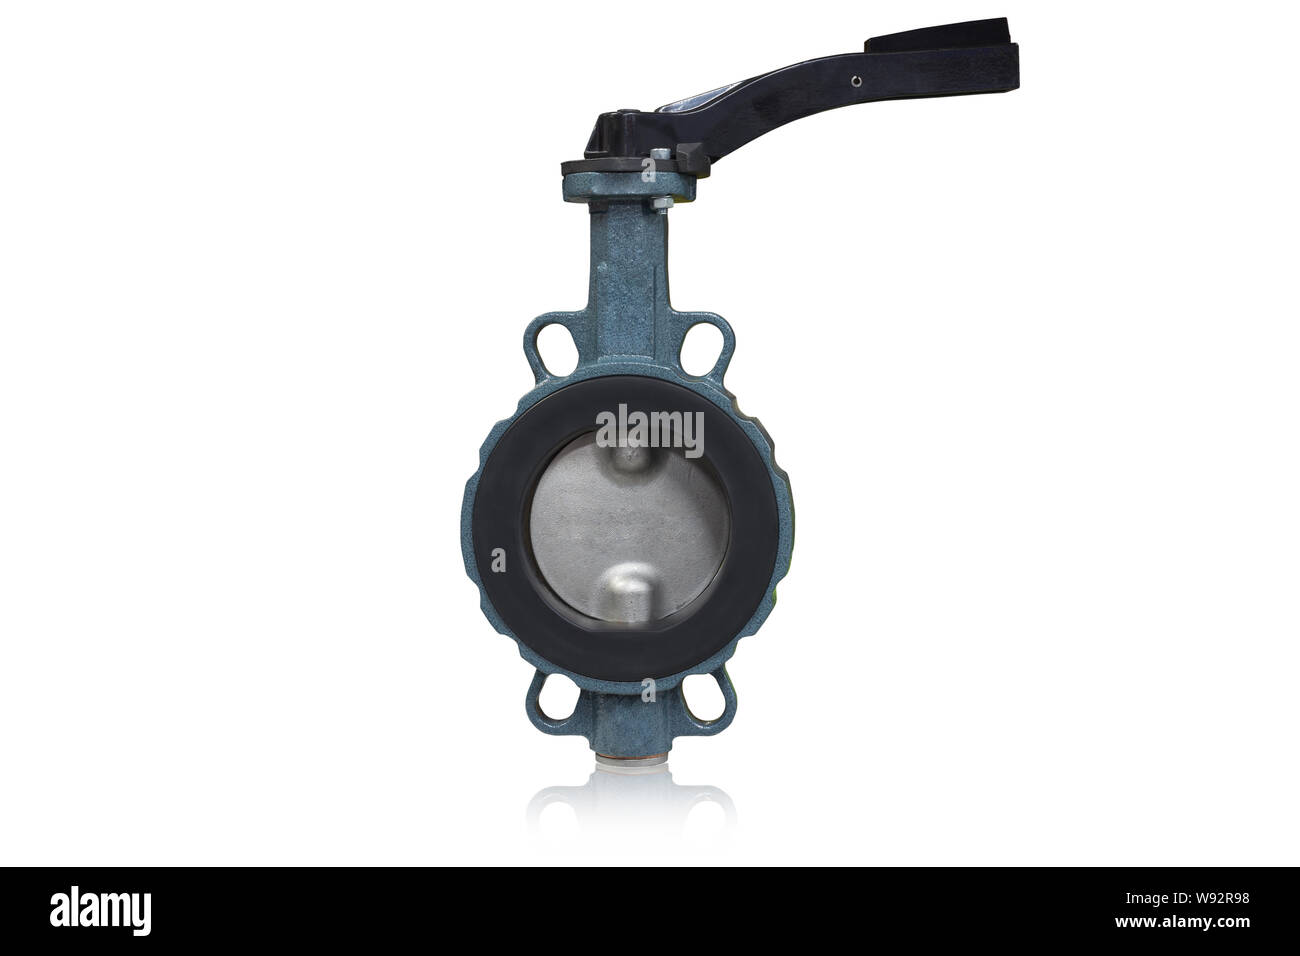 Butterfly valve type used in oil and gas industry isolated on white background. Stock Photo